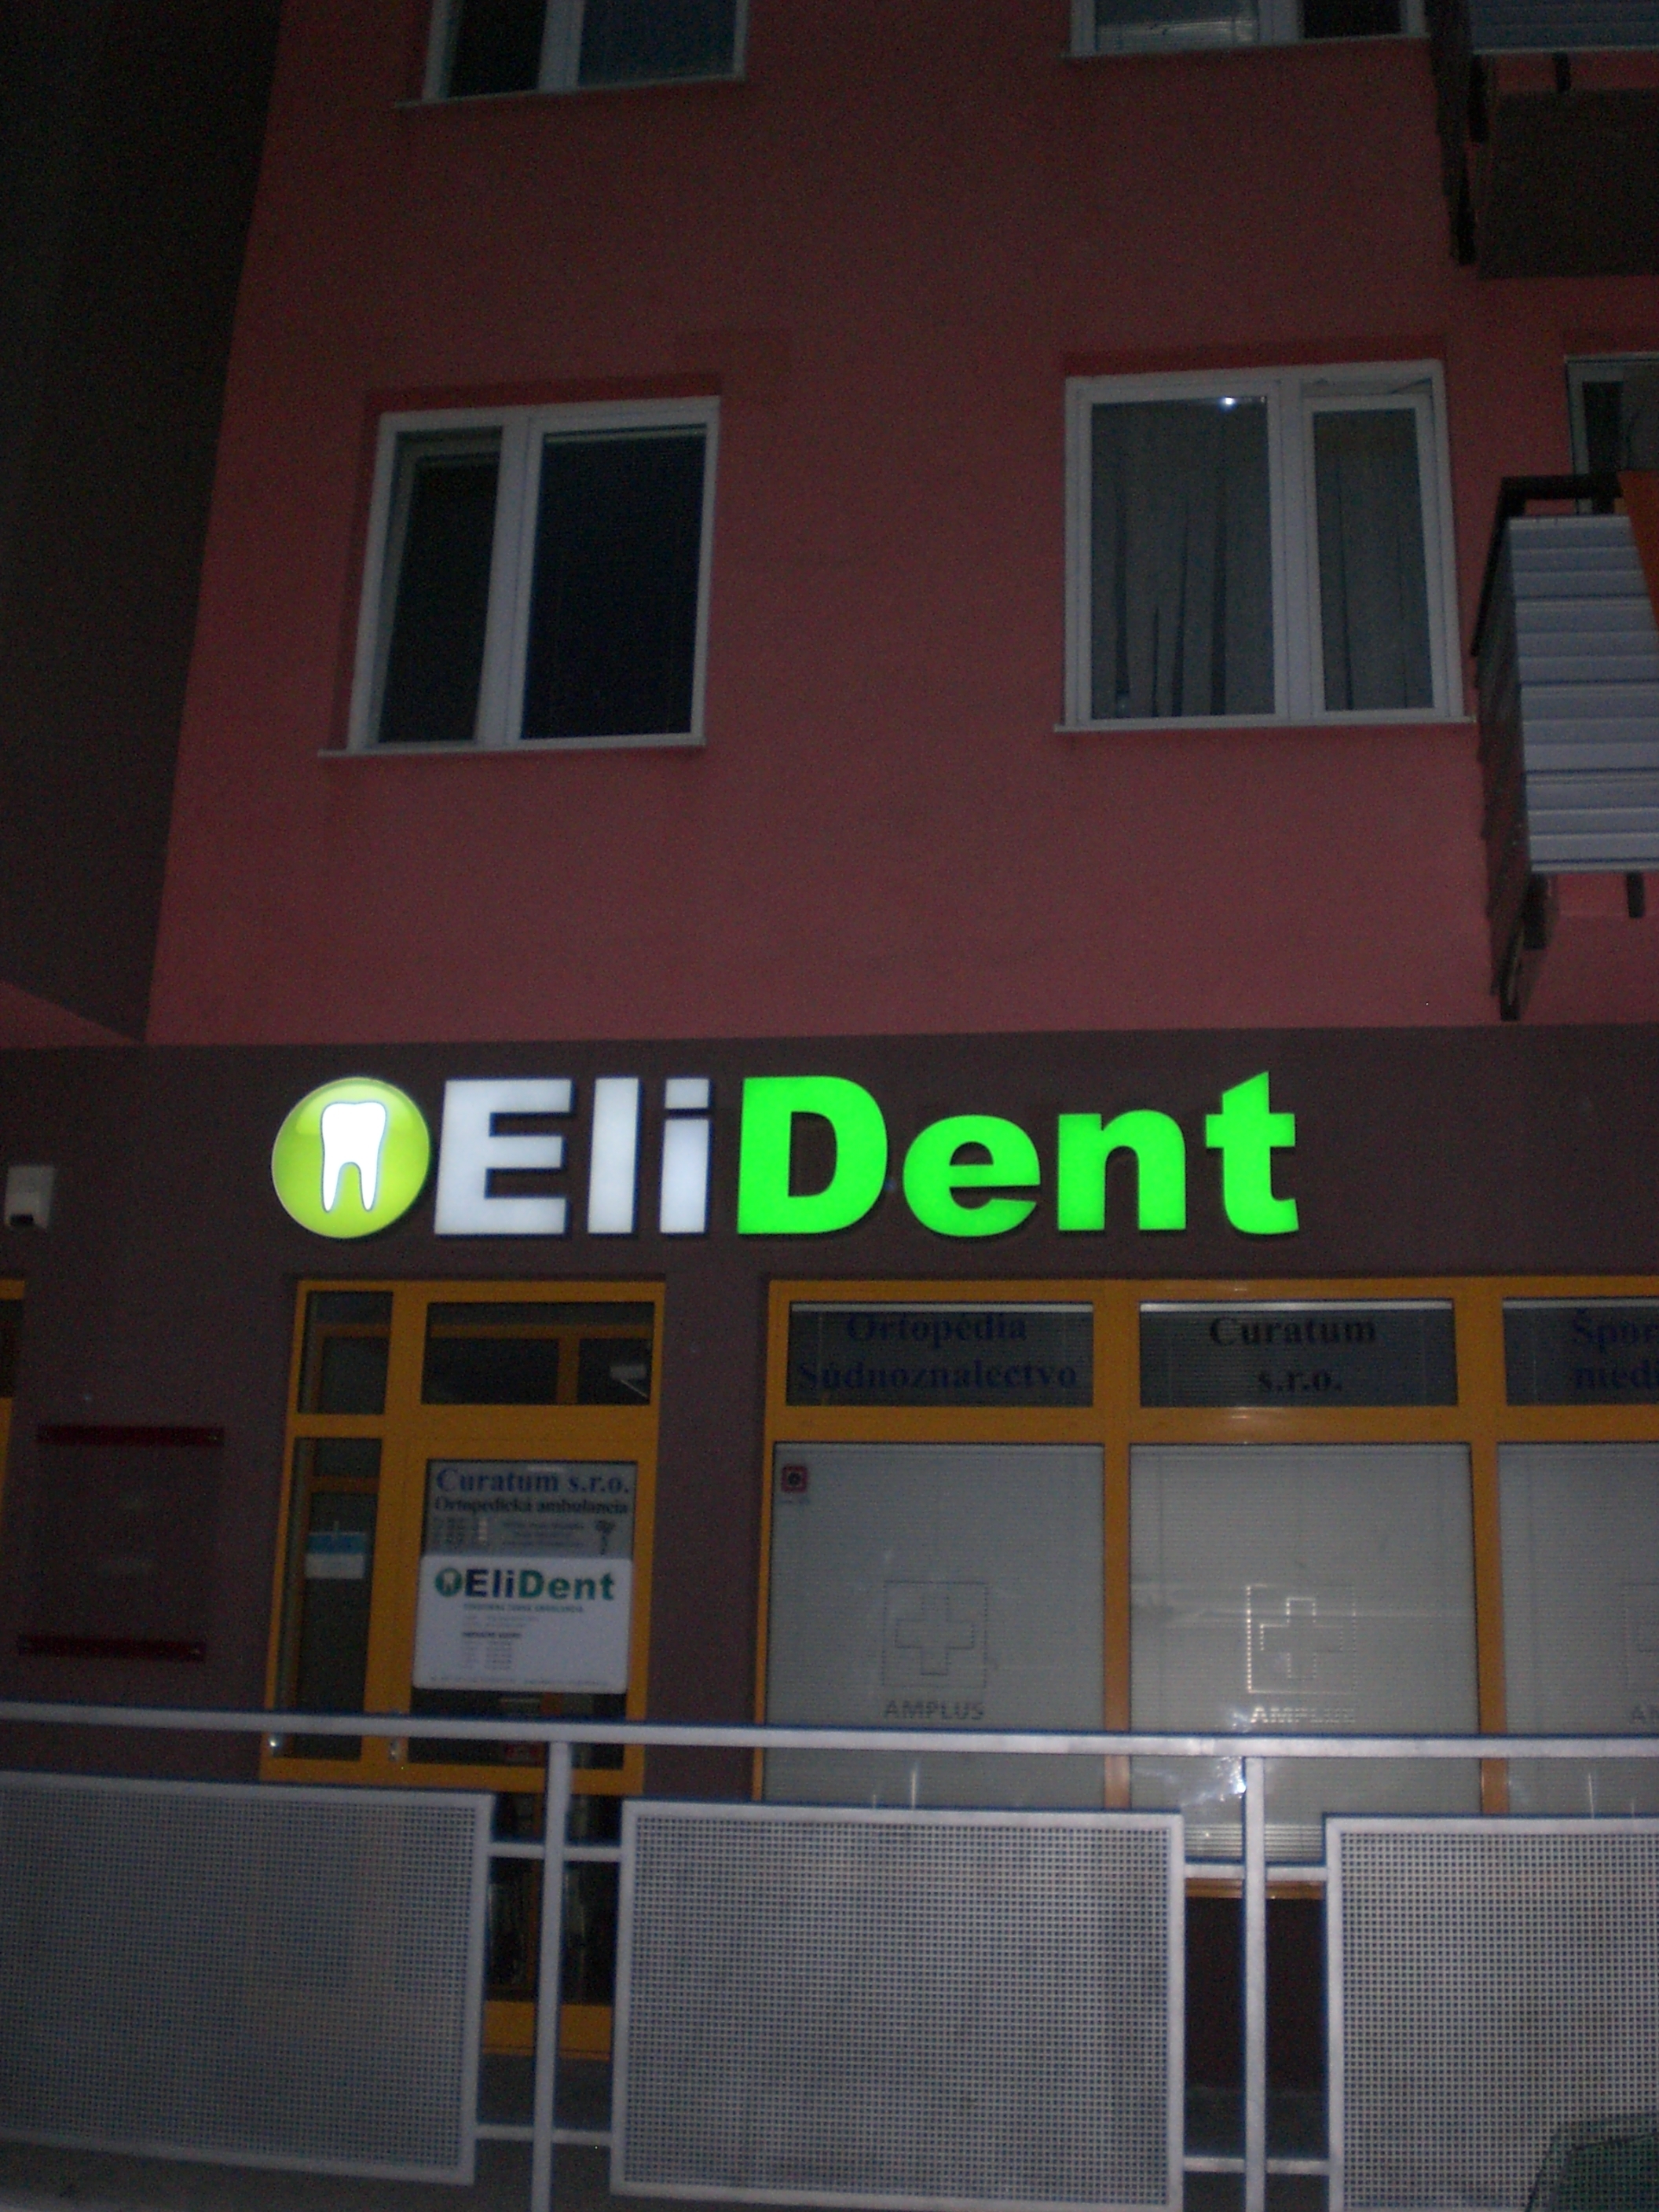 EliDent by night